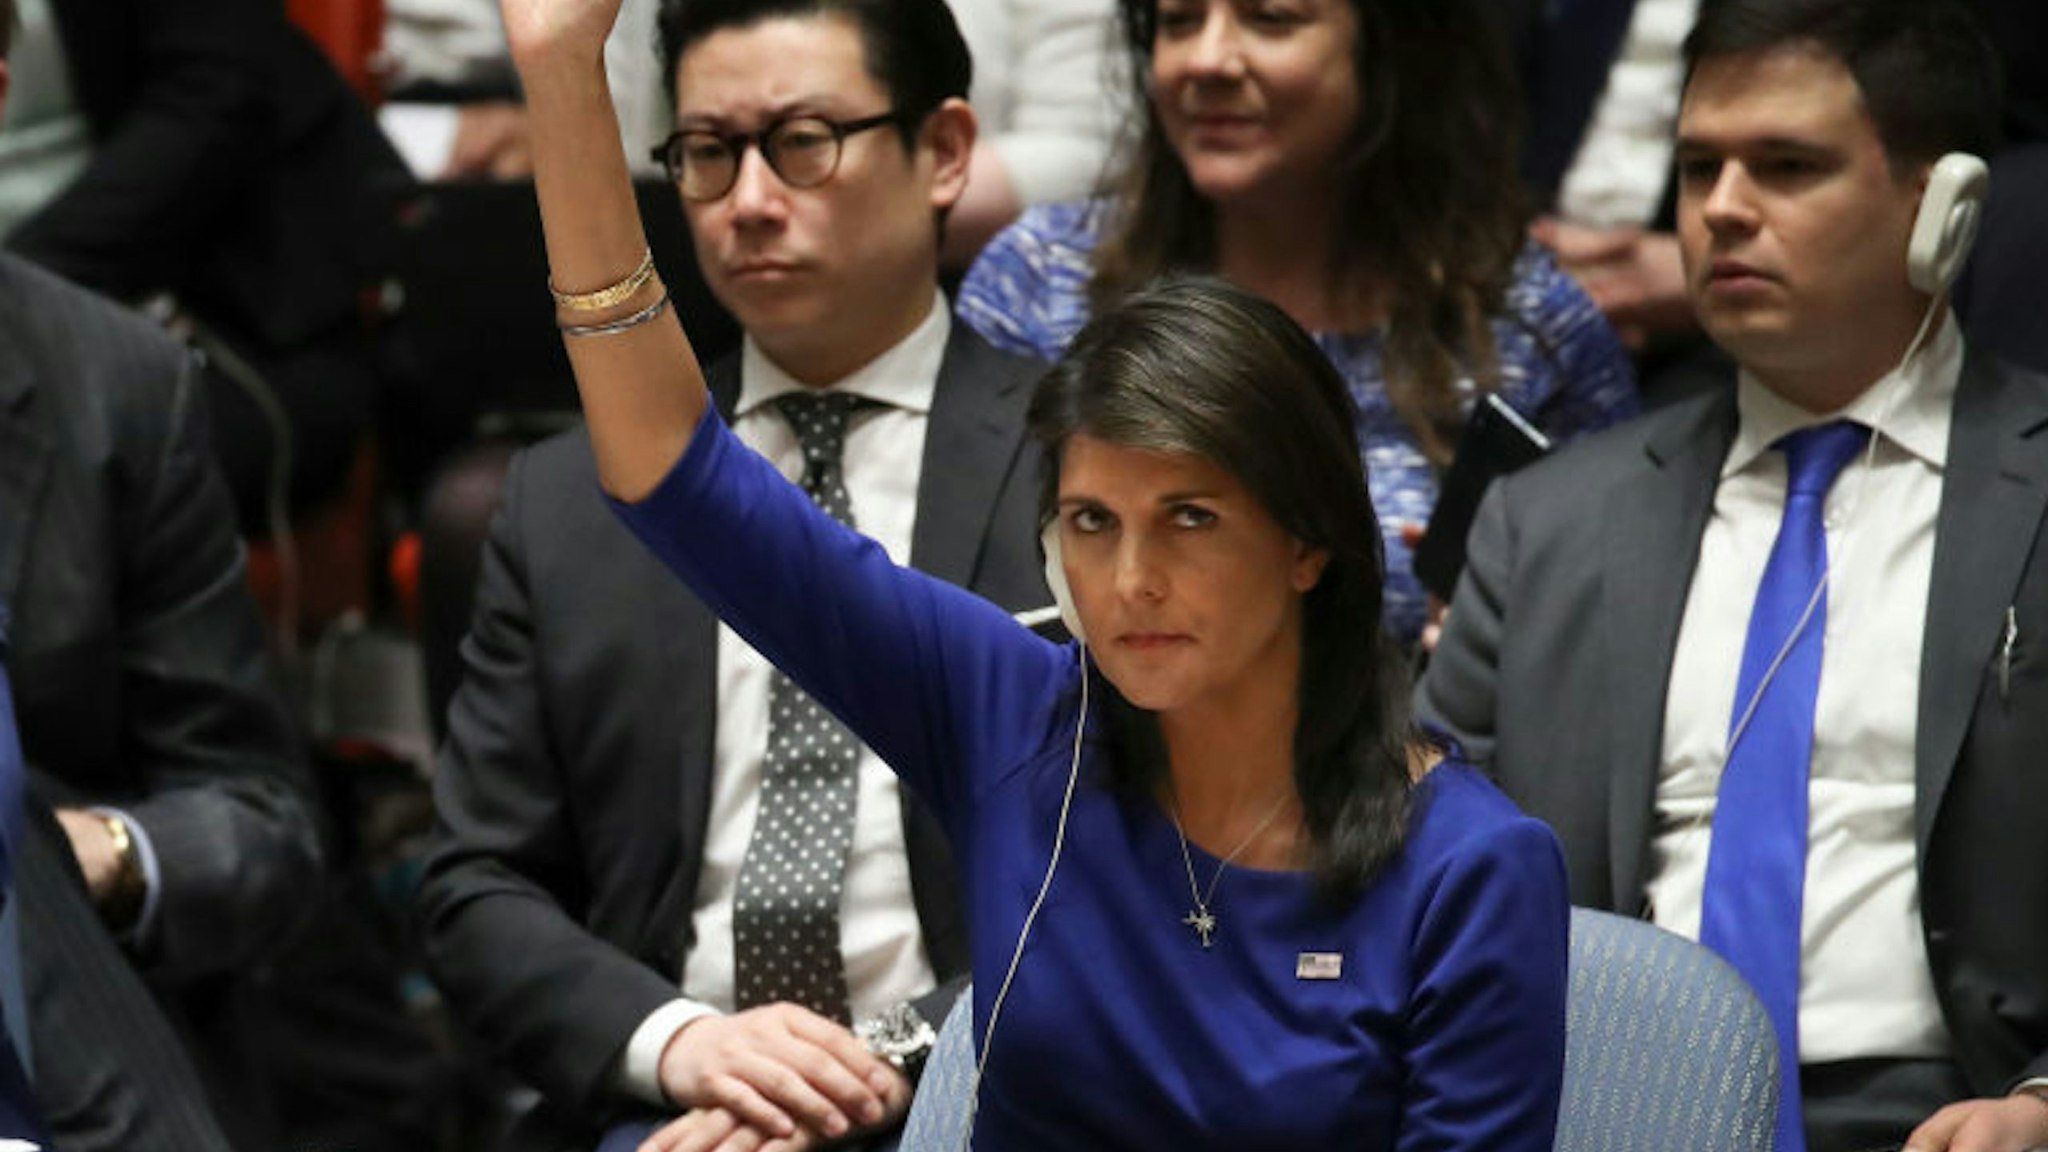 NEW YORK, NY - APRIL 14: United States Ambassador to the United Nations Nikki Haley vetoes a Russian proposed draft resolution that would "condemn the aggression against Syria by the U.S. and its allies" during a United Nations Security Council emergency meeting concerning the situation in Syria, at United Nations headquarters, April 14, 2018 in New York City. Yesterday the United States and European allies Britain and France launched airstrikes in Syria as punishment for Syrian President Bashar al-Assad's suspected role in last week's chemical weapons attacks that killed upwards of 40 people.